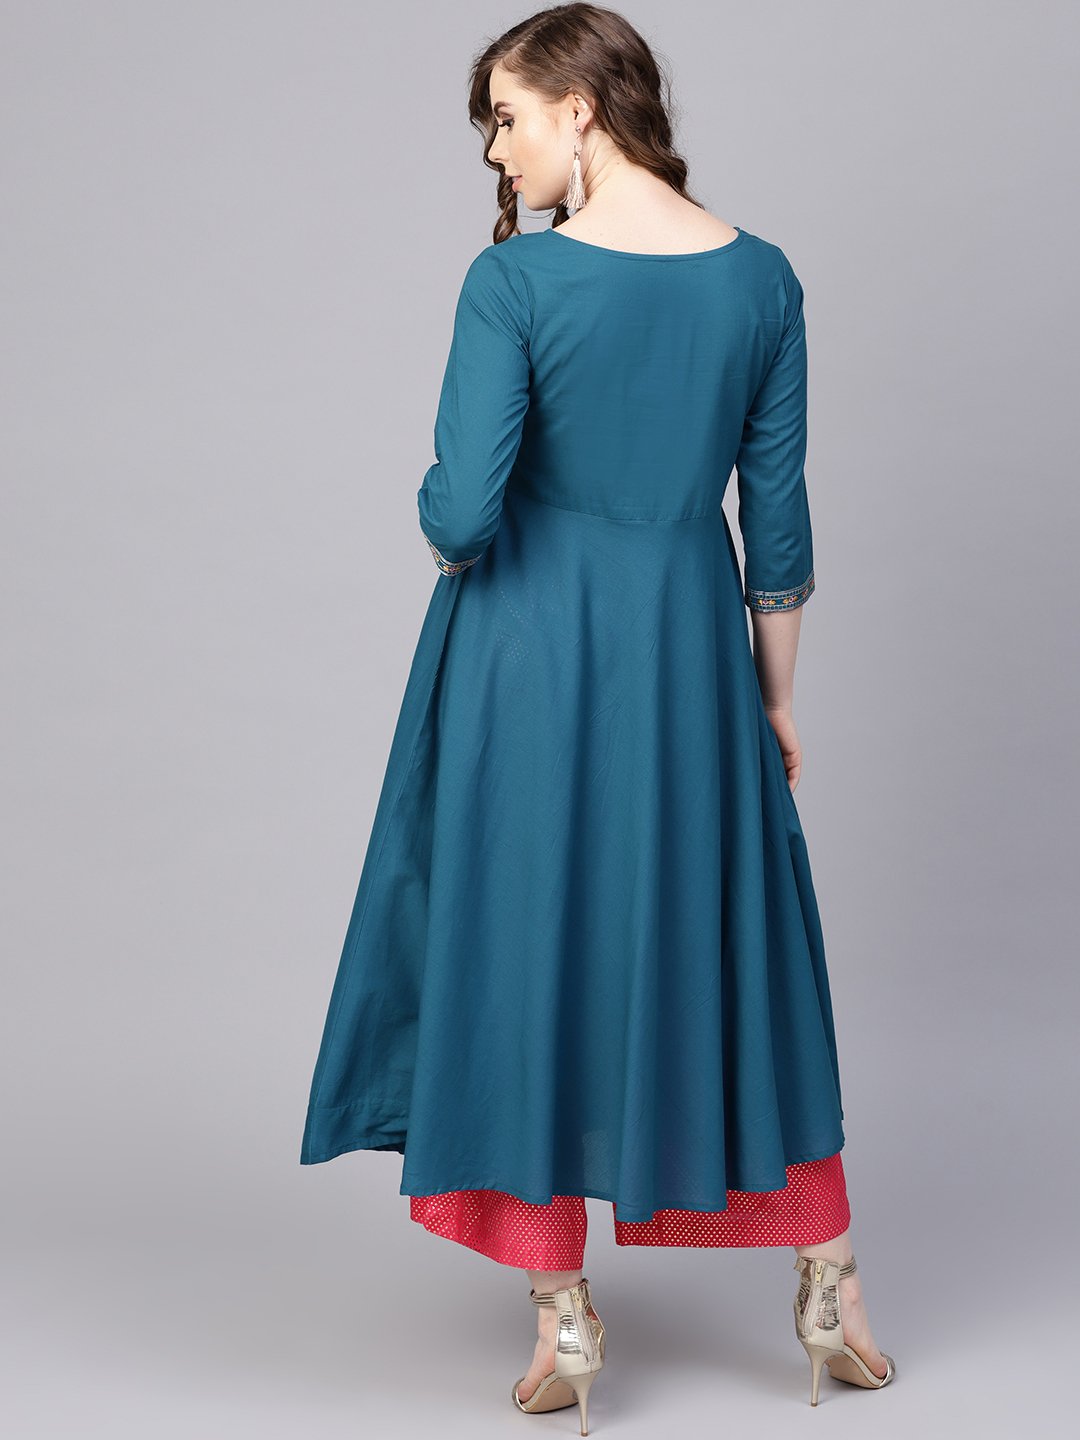 Women's Teal Blue Embroidered Kurta With Round Neck & 3/4 Sleeves - Nayo Clothing